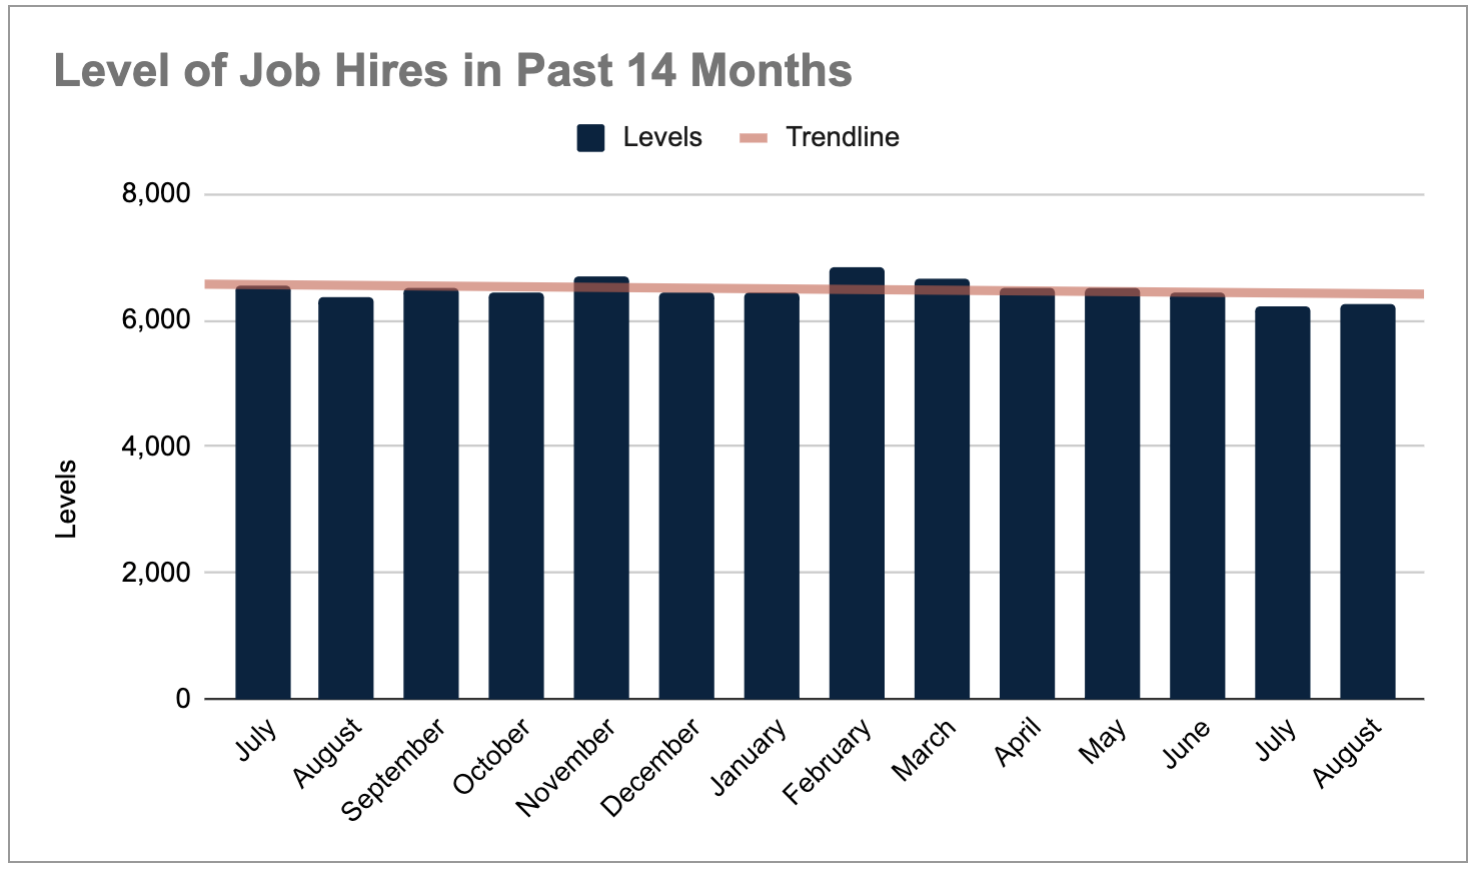 Level of job hires in past 14 months